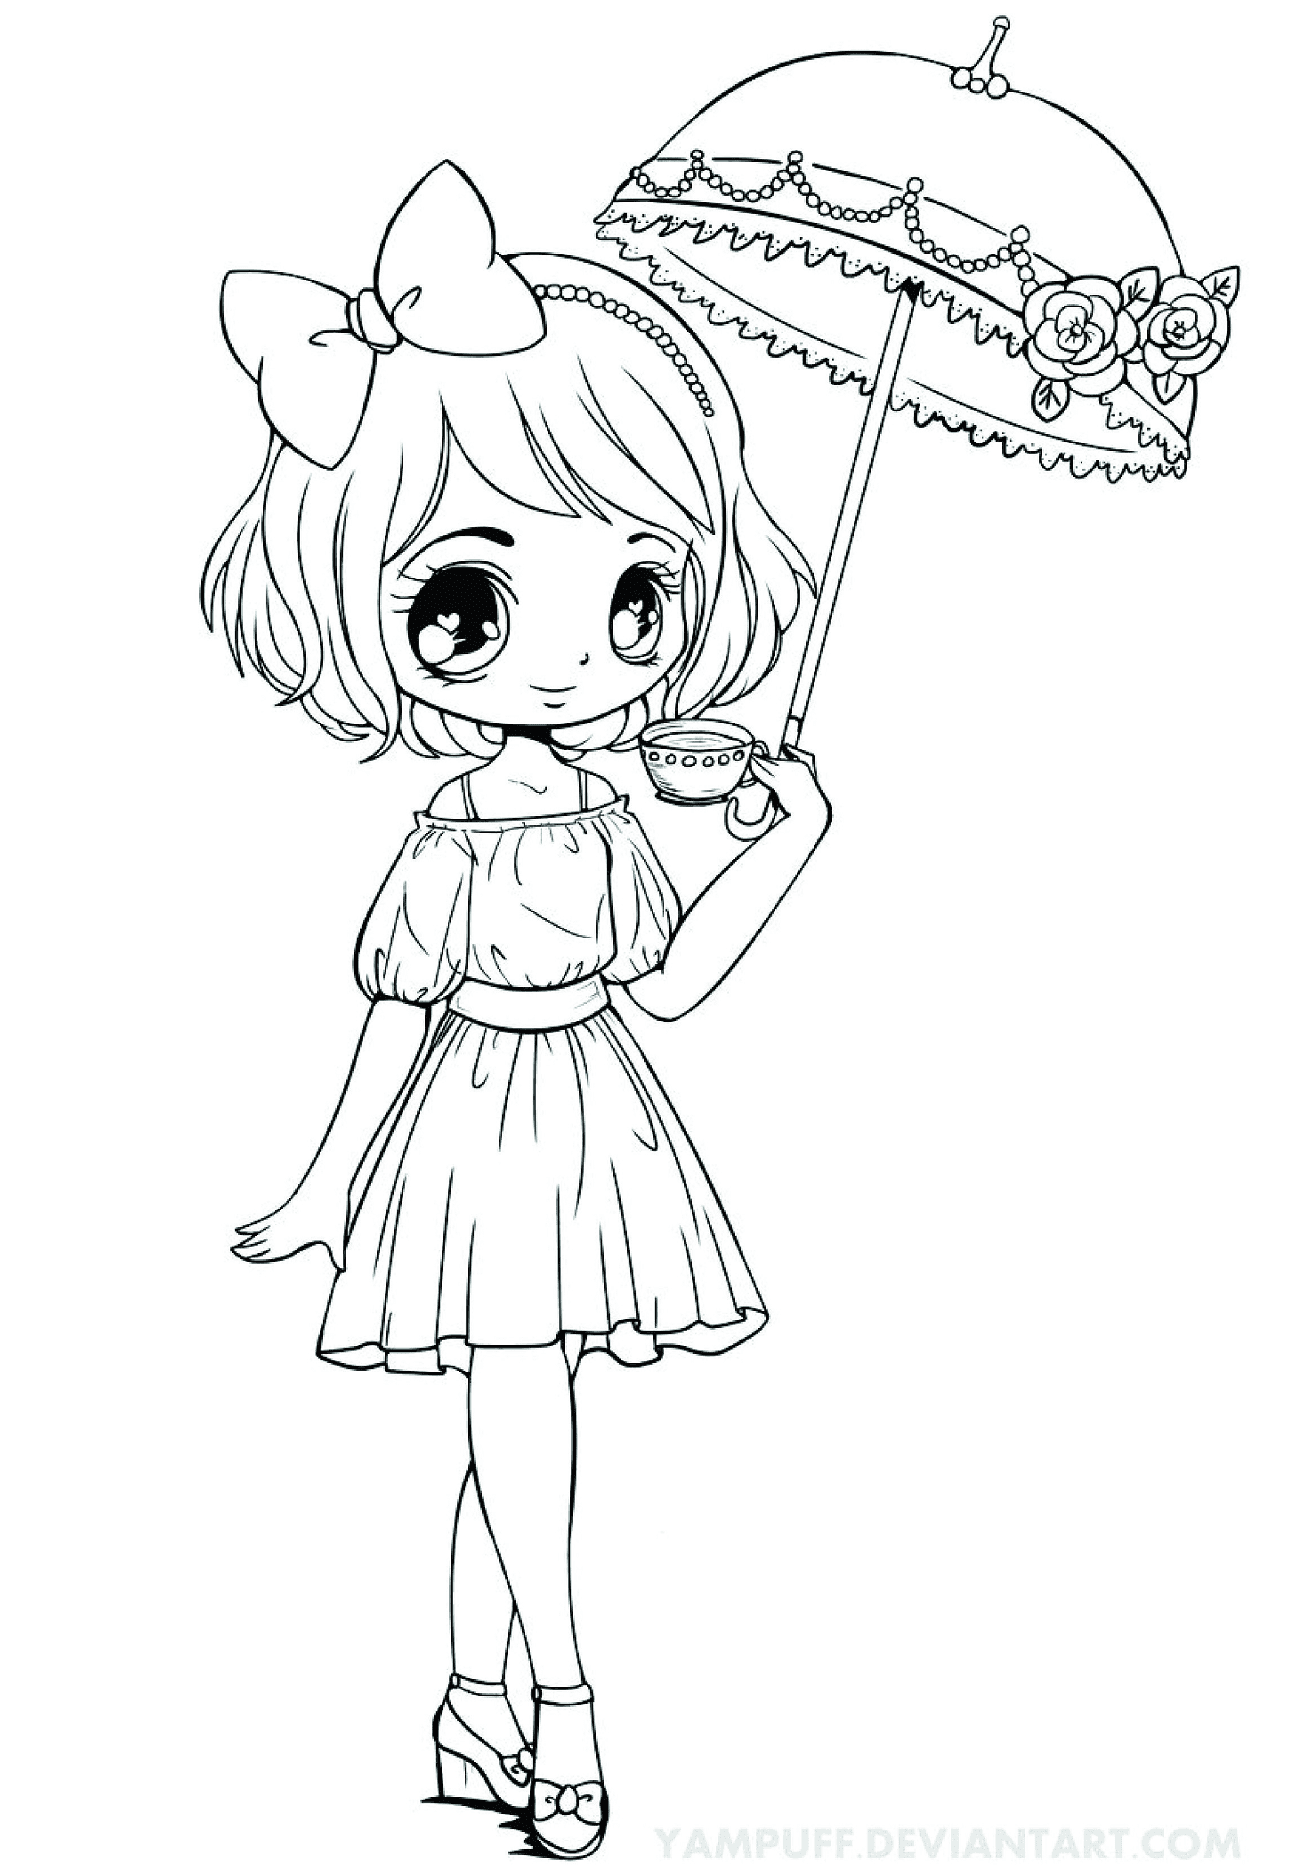 Cute Chibi Girl Coloring Page